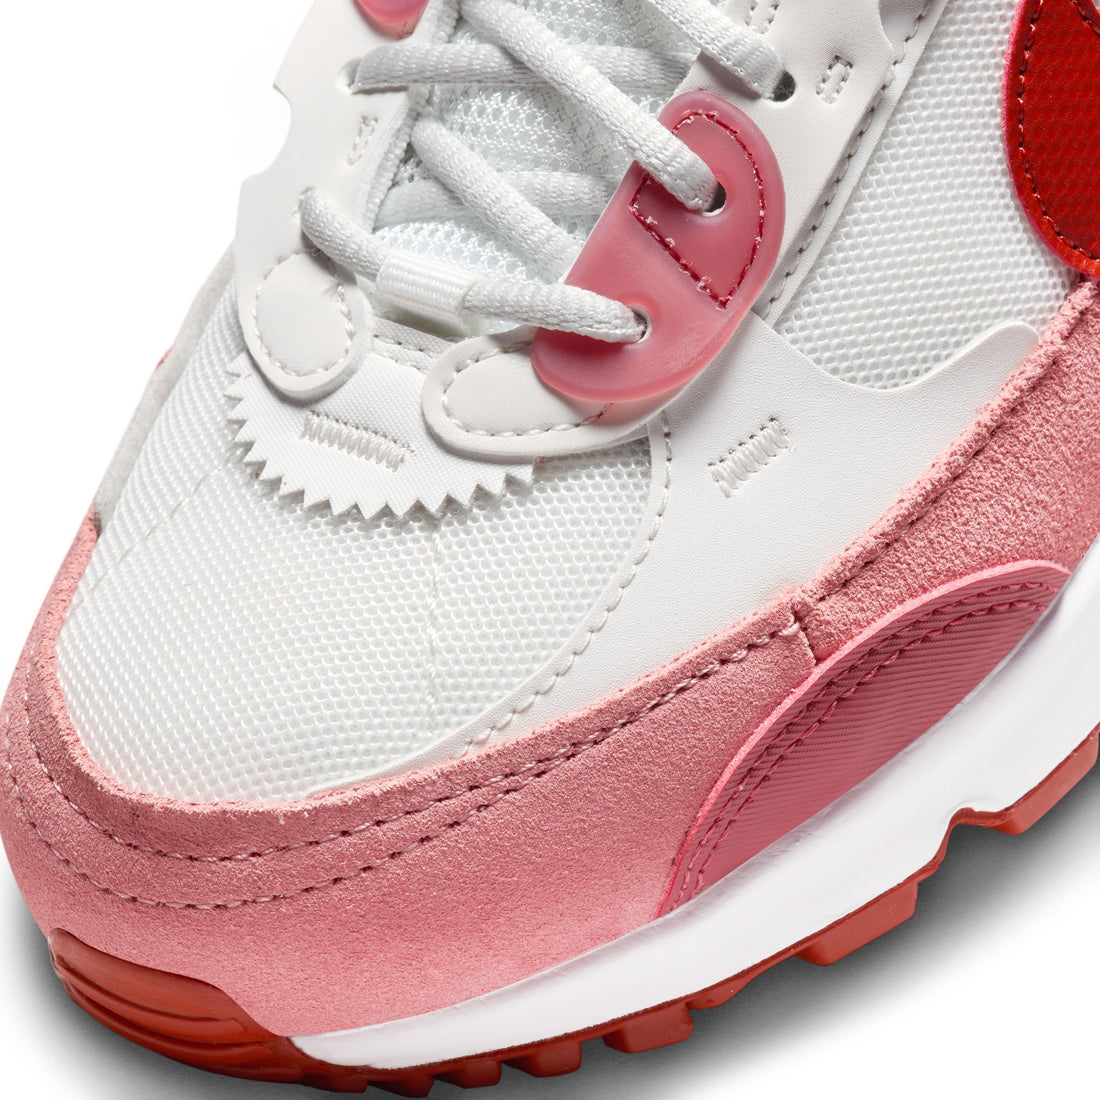 Nike Women's Air Max 90 Futura in Red | Size 7.5 | FQ8881-618